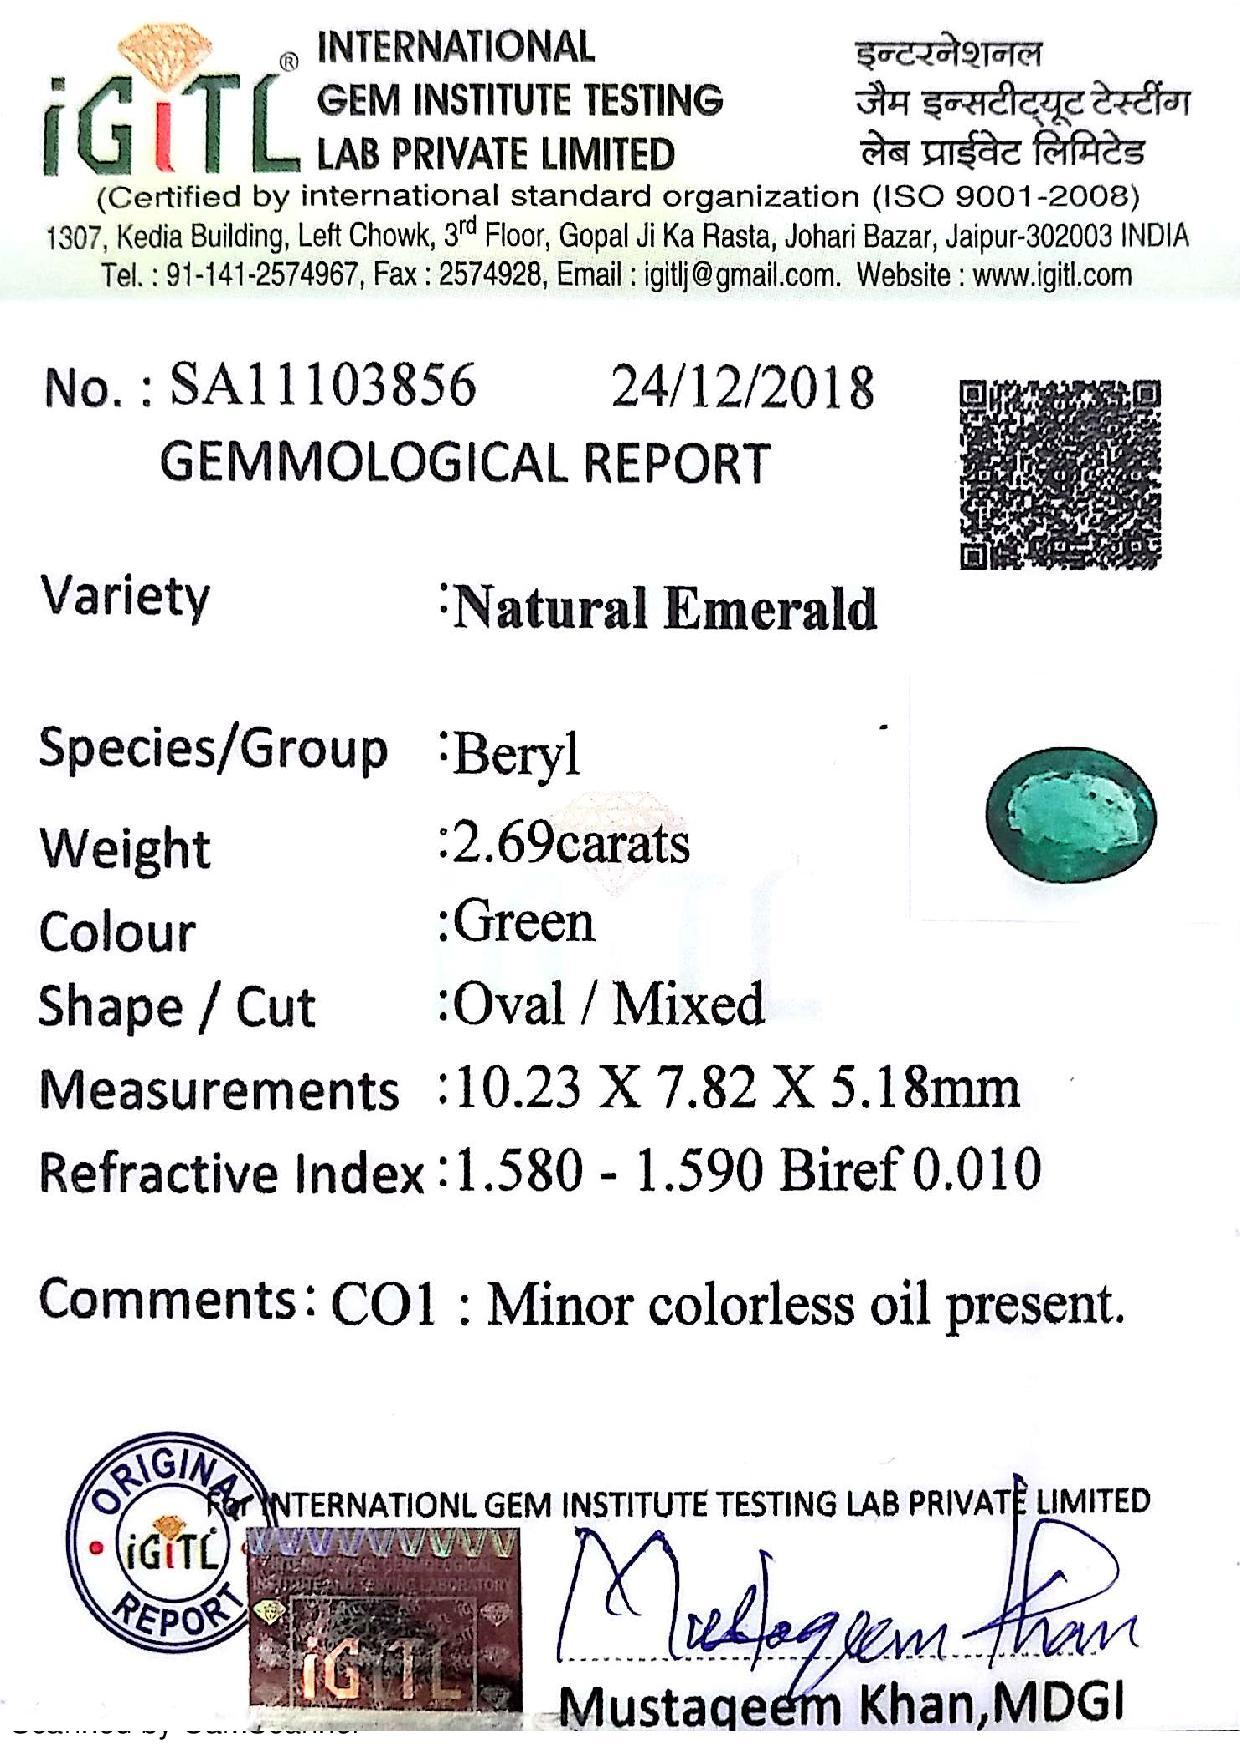 Oval Cut 2.69 Ct Weight Oval Shaped Green Color IGITL Certified Emerald Gemstone Pendant For Sale